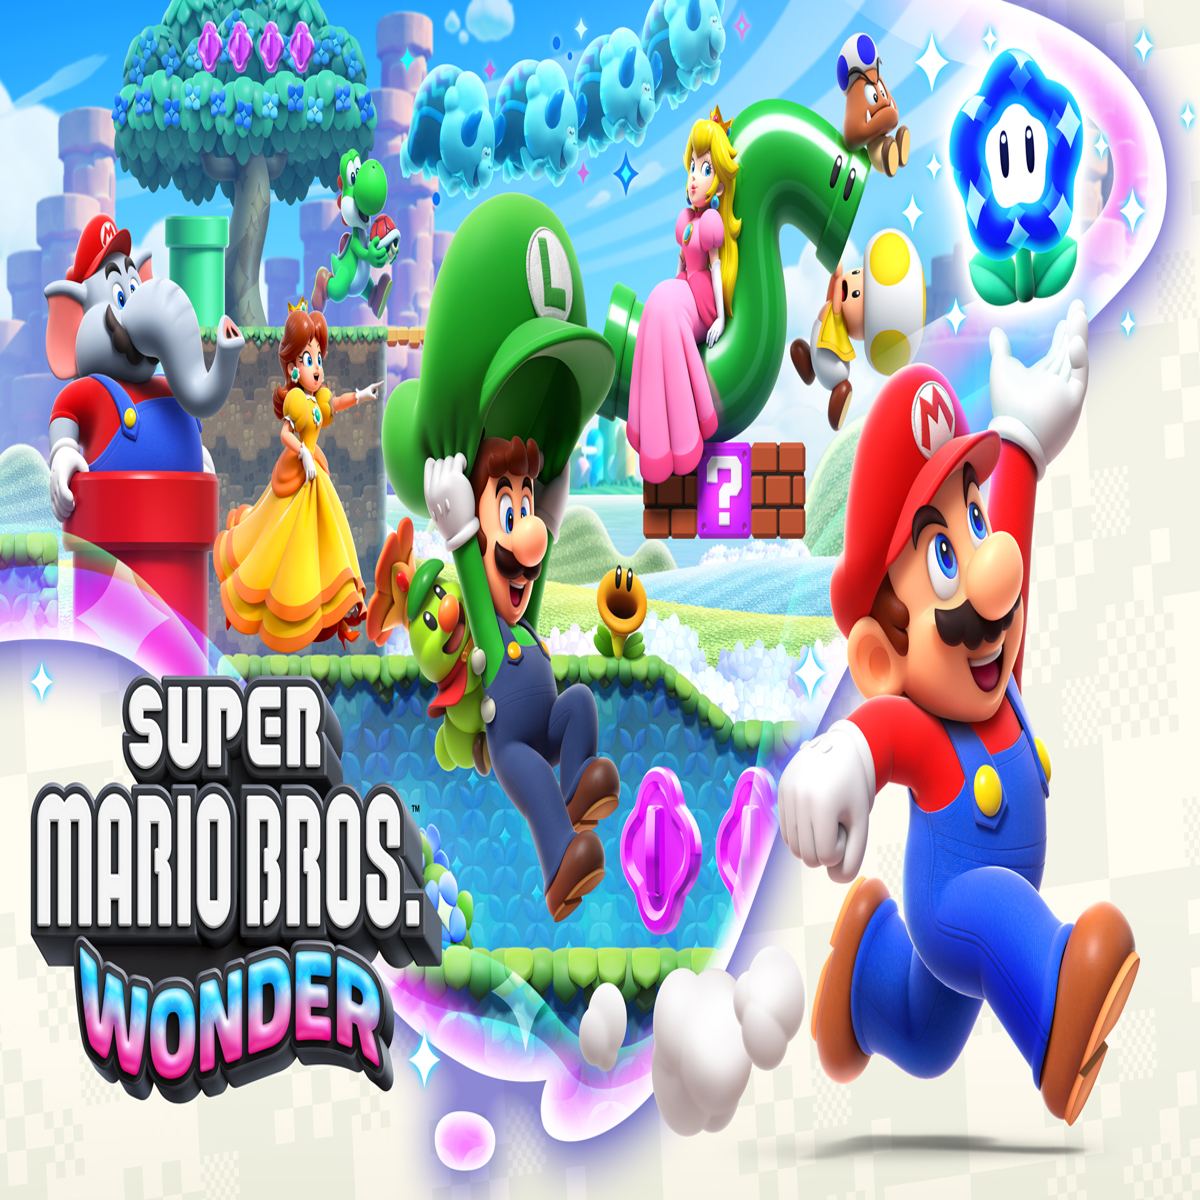 Super Mario Bros. Wonder: The First Preview